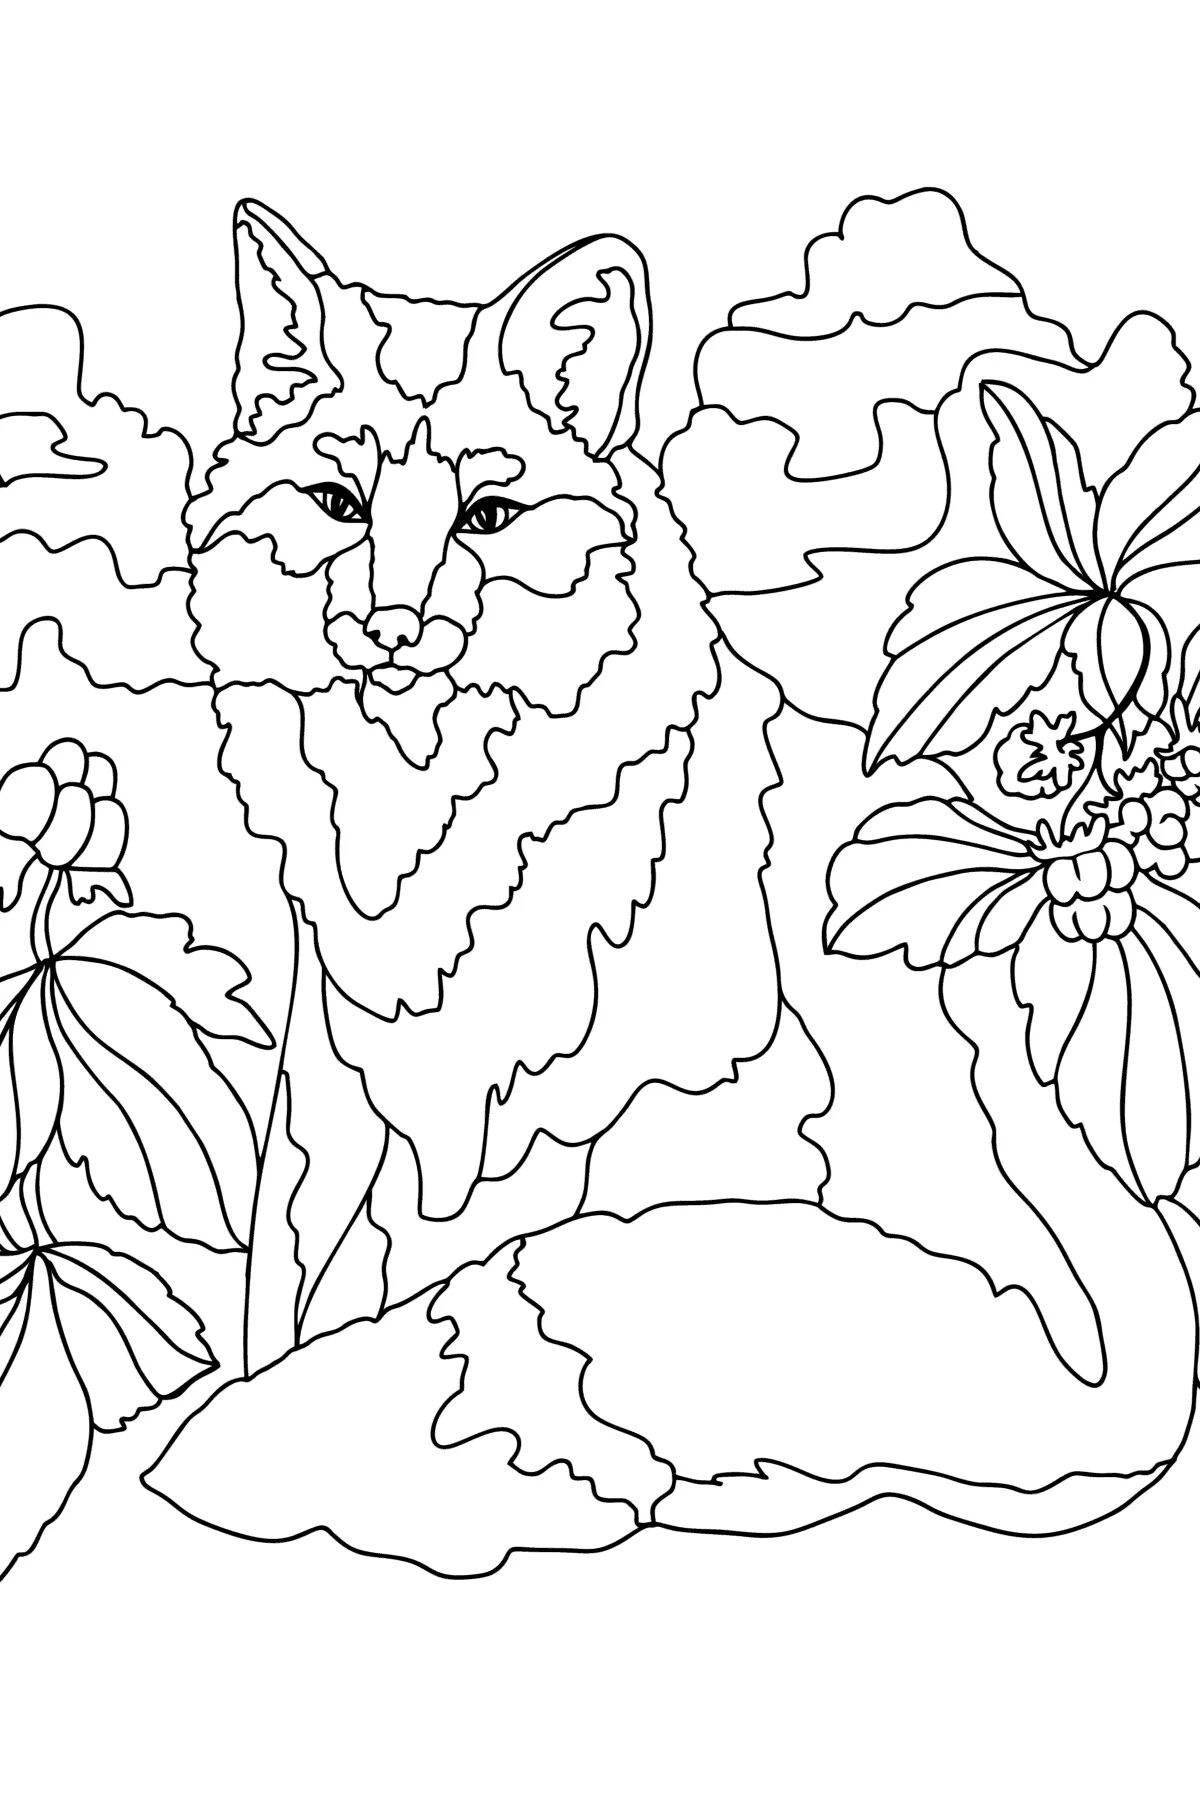 A playful fox coloring book for adults